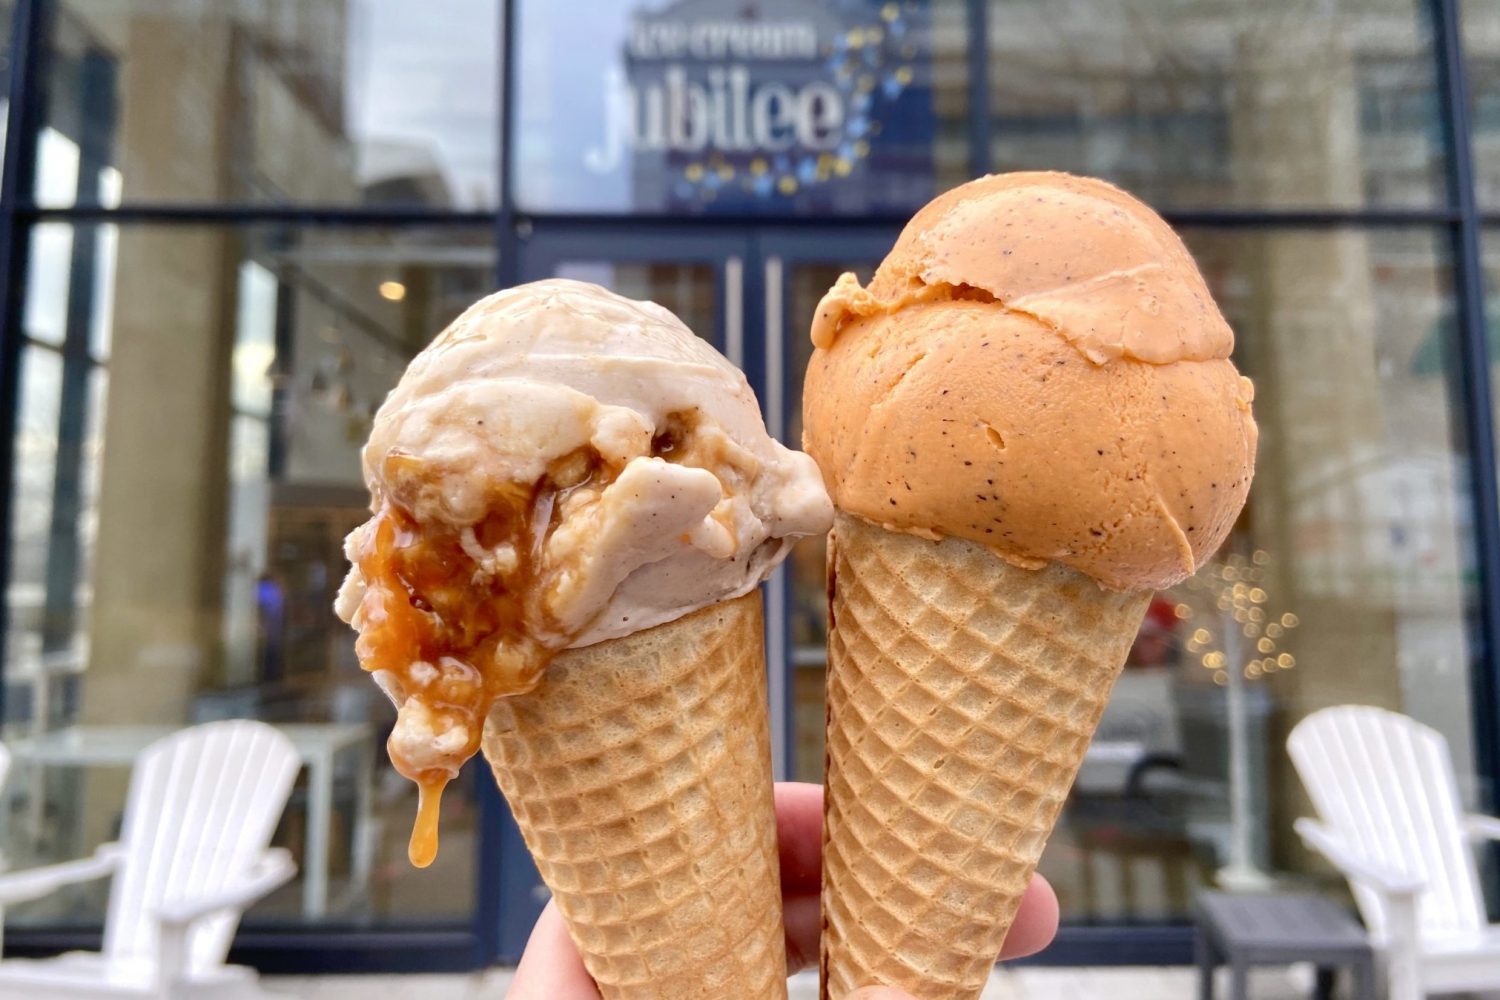 Ice Cream Jubilee is partnering with Eclipse Foods to create dairy-free versions of their bestsellers. Photo courtesy of Ice Cream Jubilee.